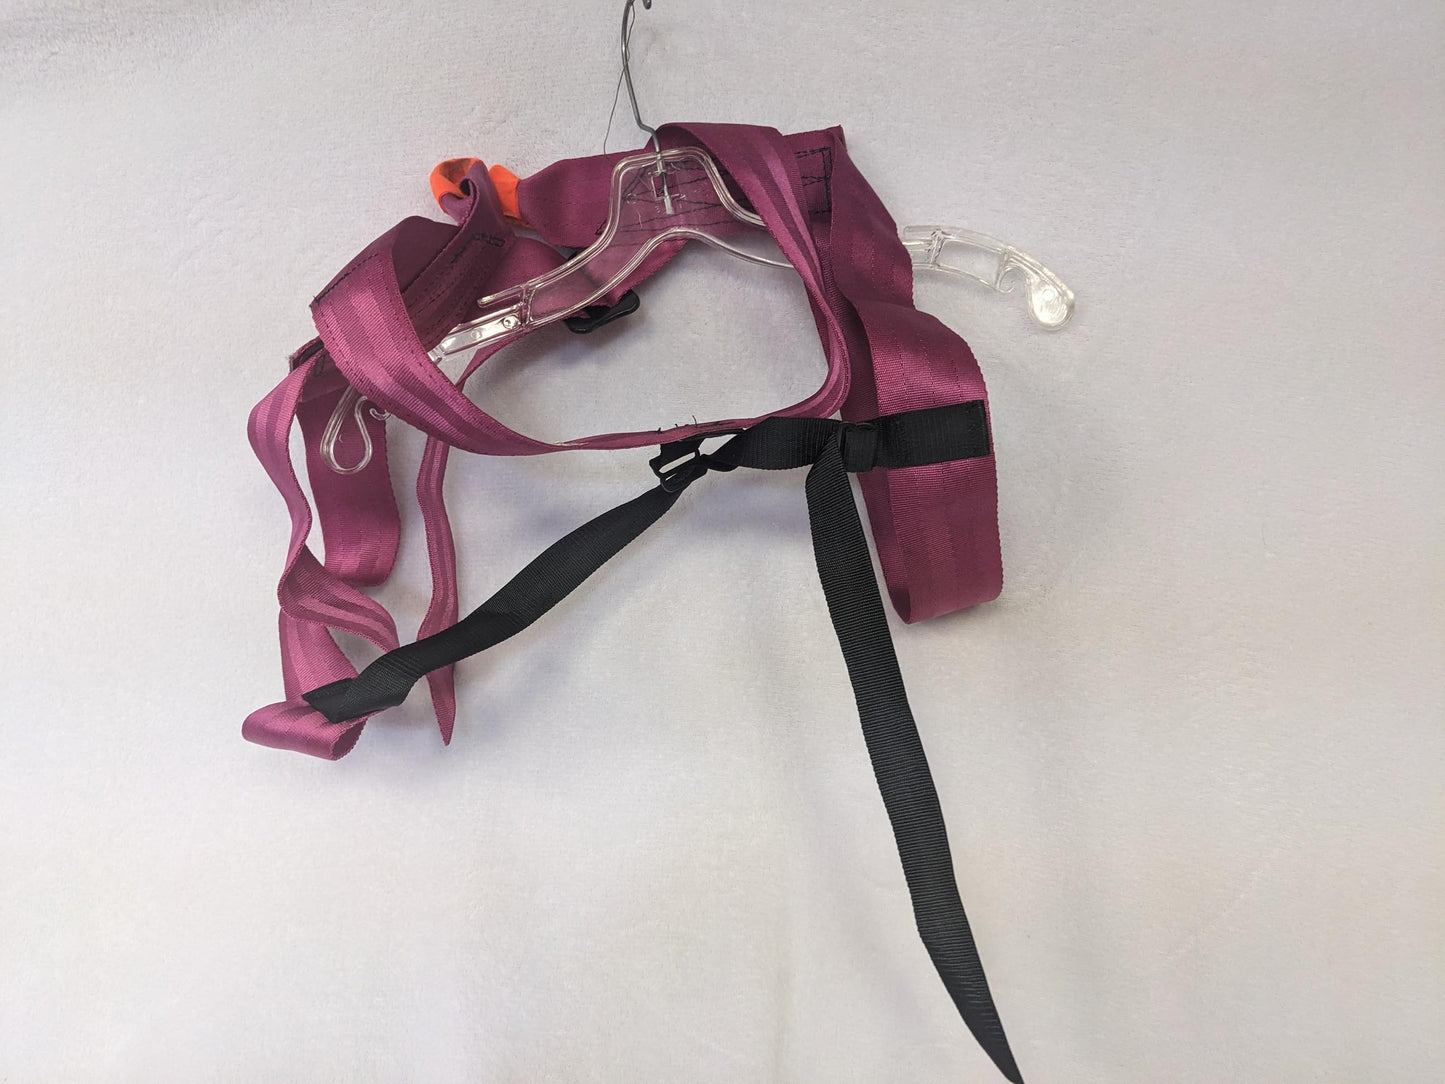 Bluewater Climbing Harness Size Large Color Pink Condition Used